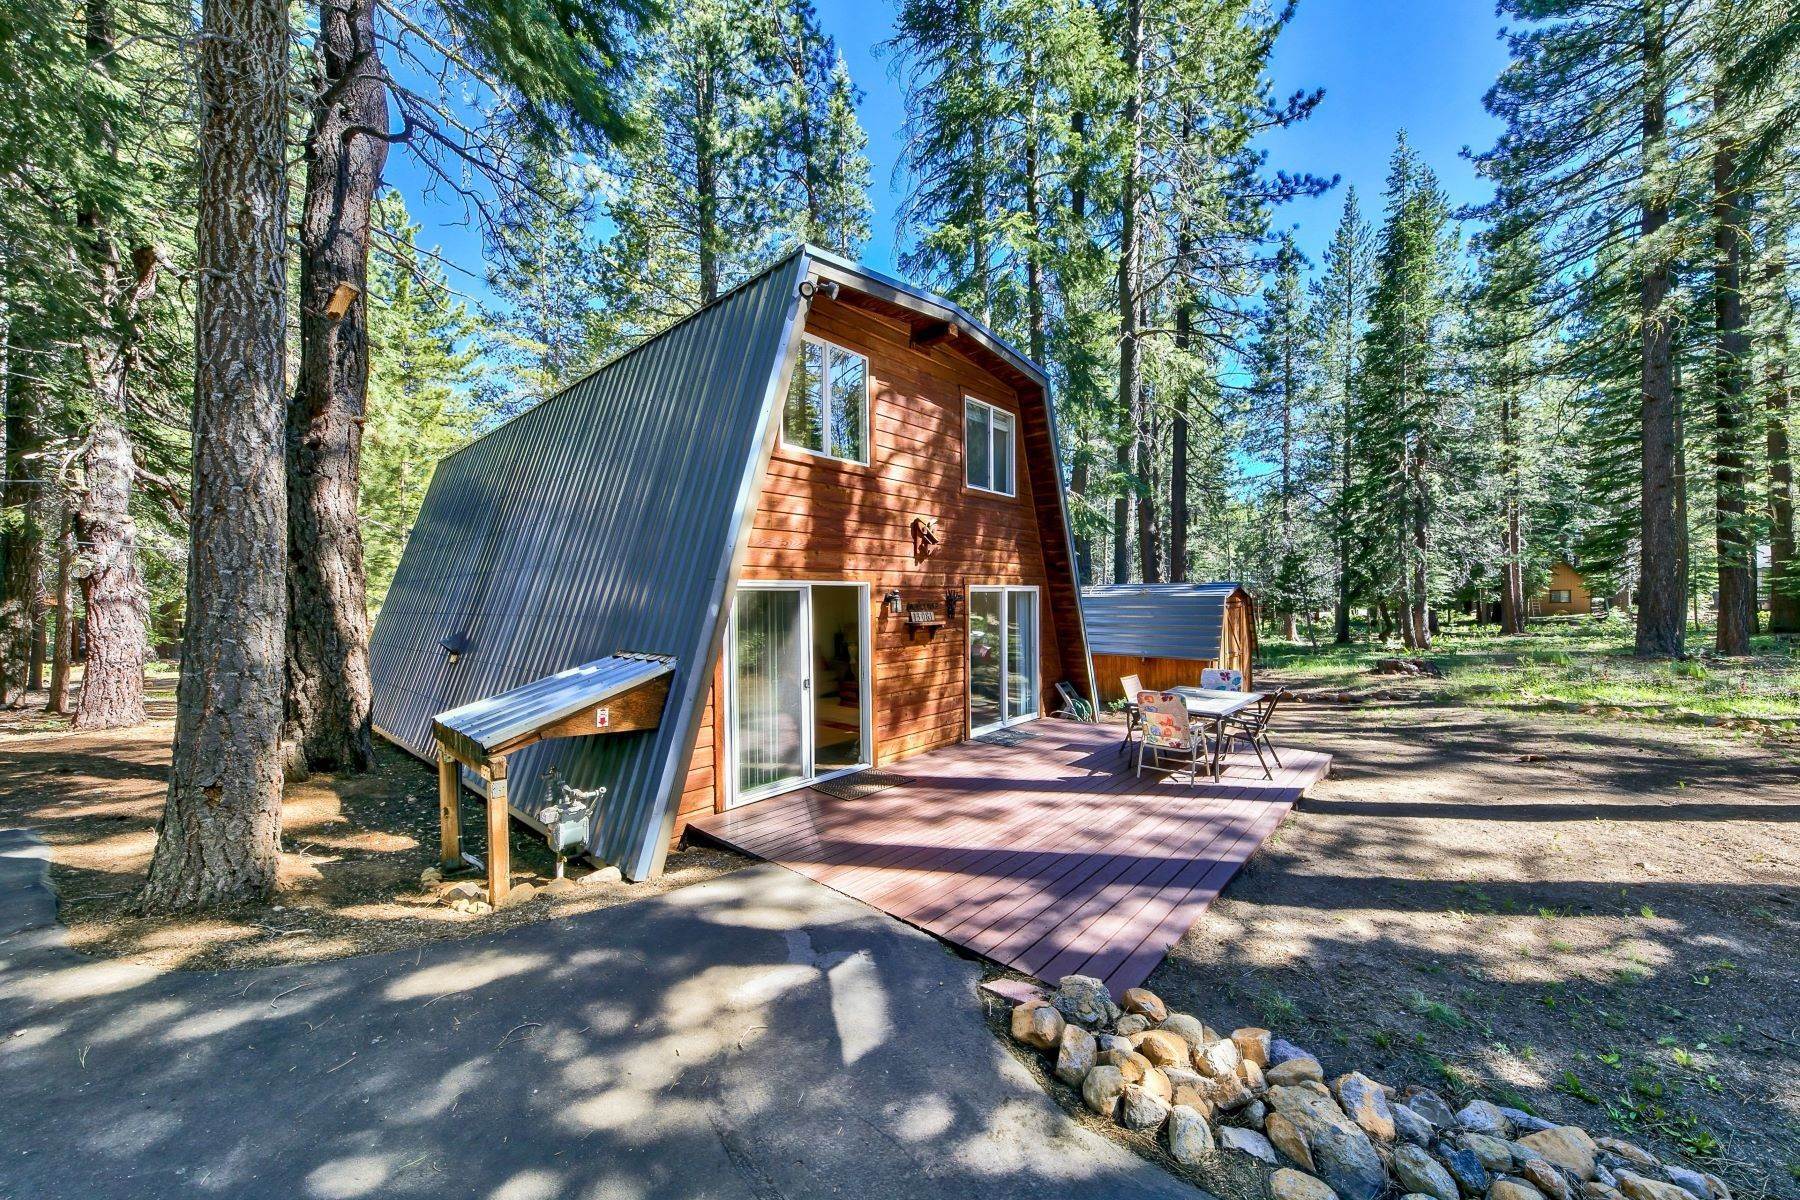 Single Family Homes for Active at Beautifully Remodeled Cabin With Room to Build 2 Car Garage and ADU 13081 Davos Dr Truckee, California 96161 United States